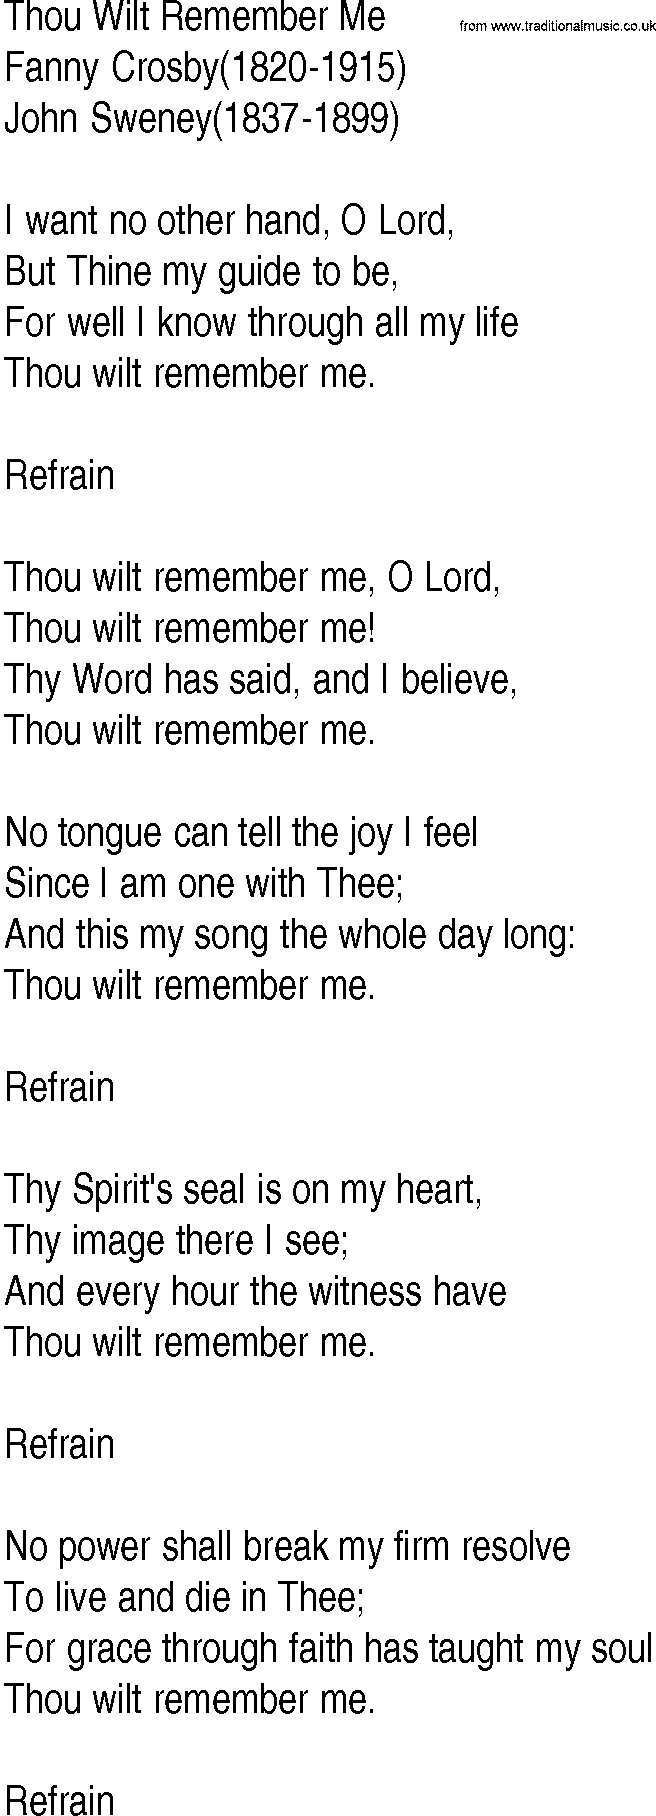 Hymn and Gospel Song: Thou Wilt Remember Me by Fanny Crosby lyrics